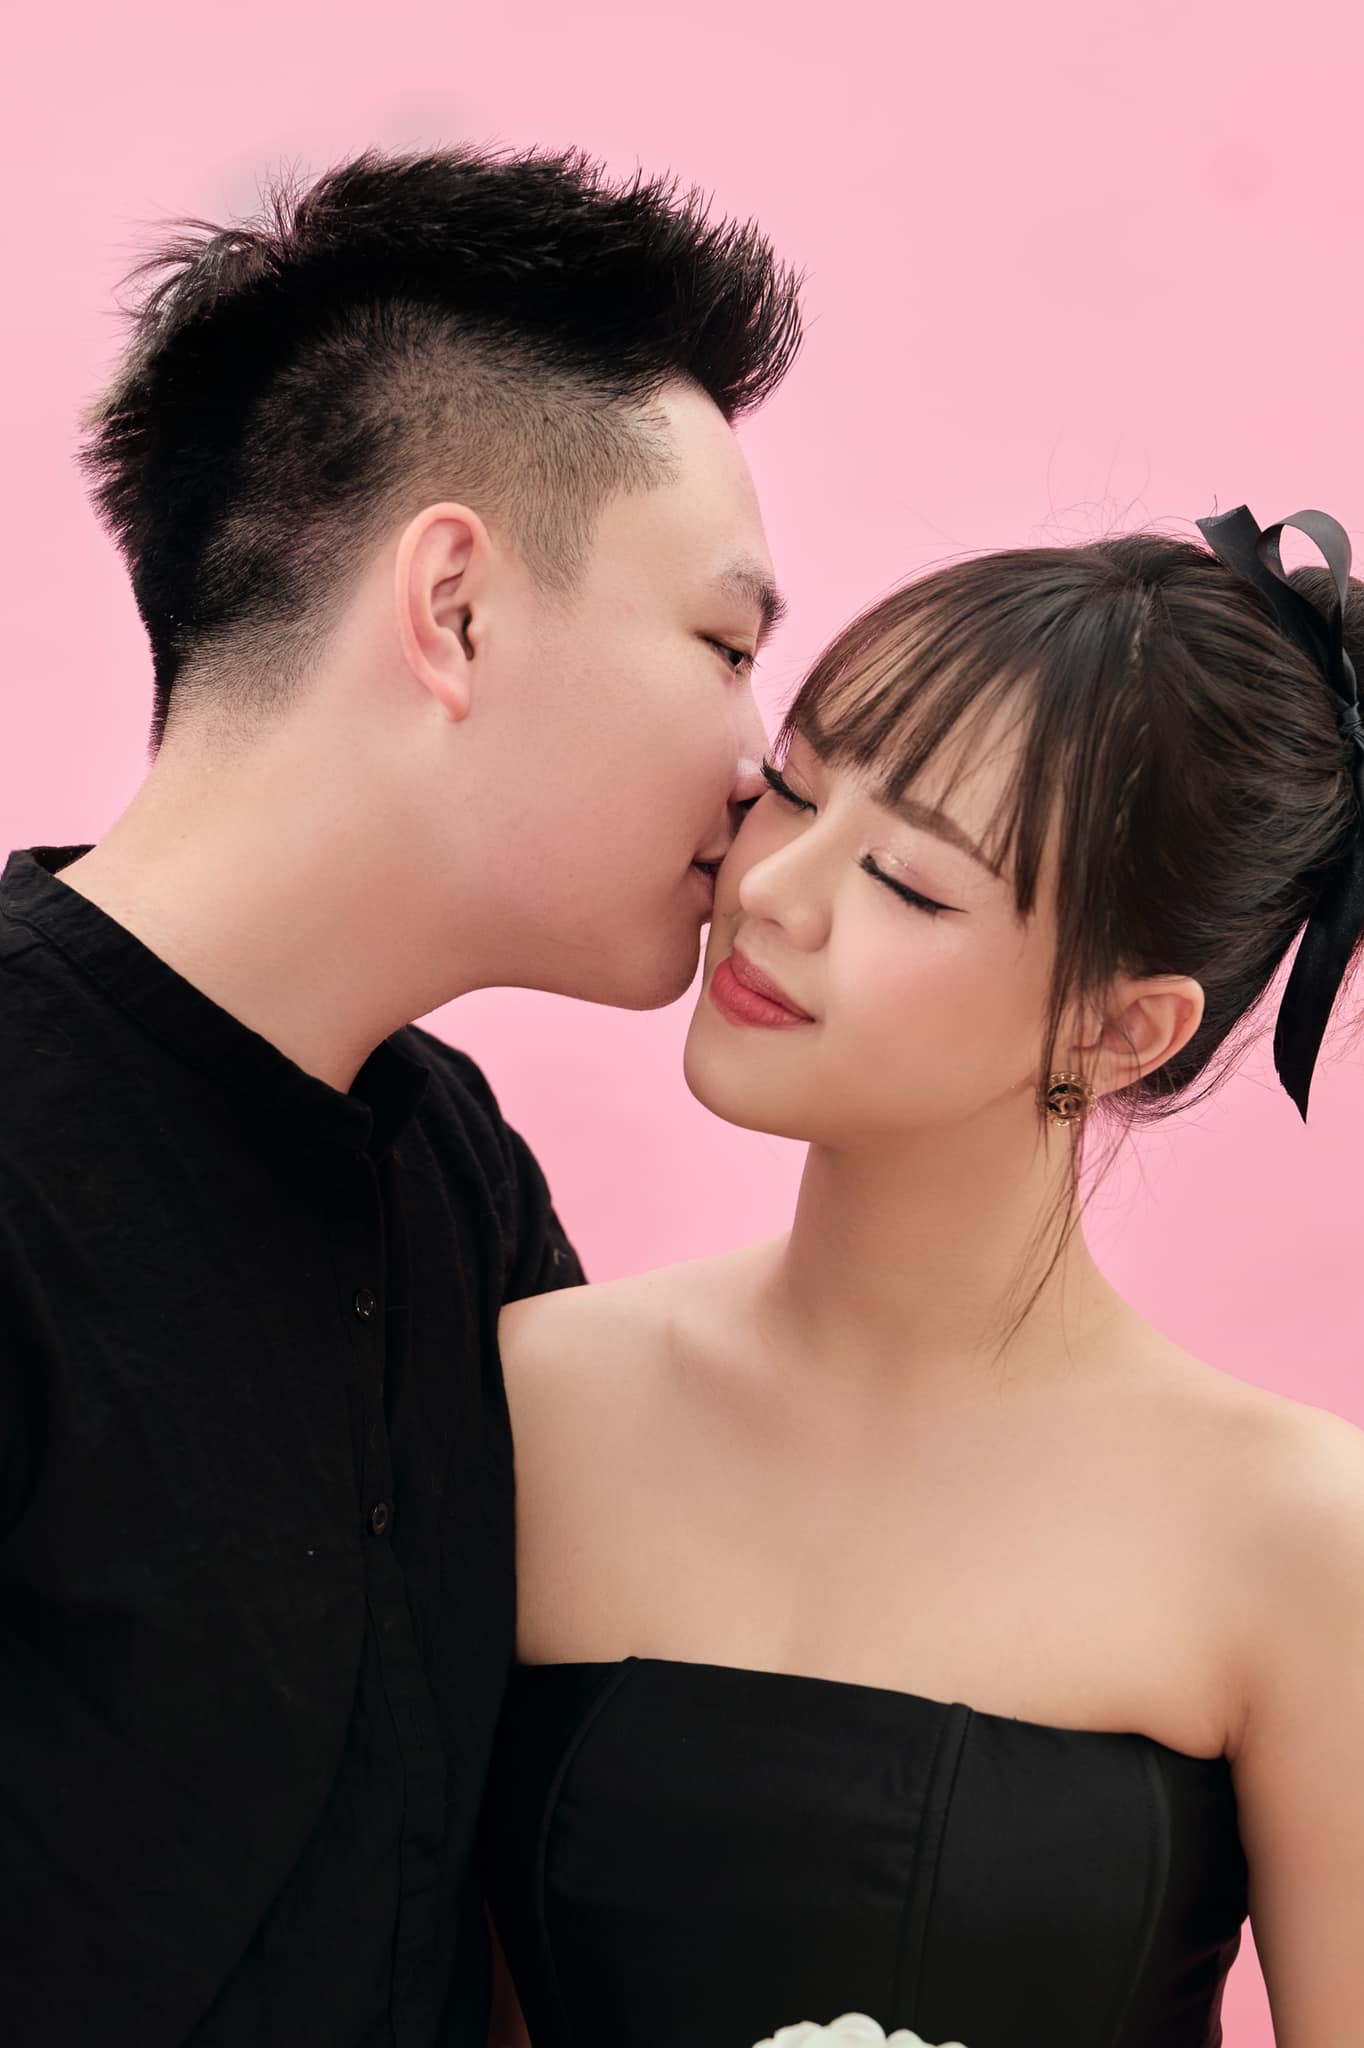 Released a 'sweet tooth' photo with her best boyfriend, Thao Trang was urged by fans to get married - Photo 3.